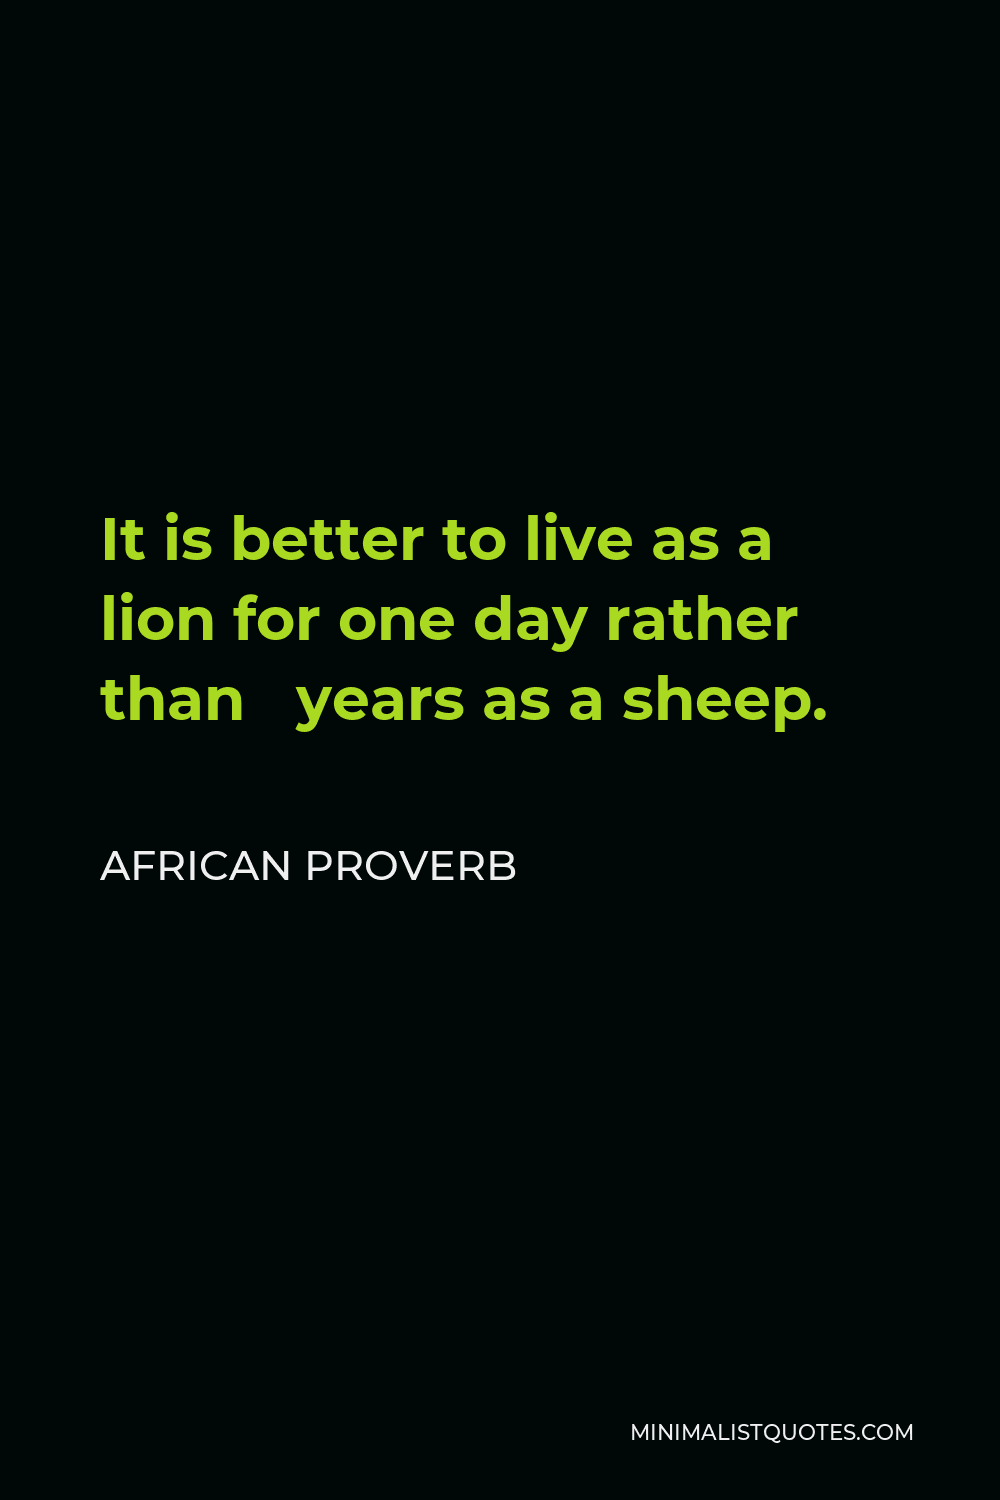 African Proverb Quote - It is better to live as a lion for one day rather than years as a sheep.